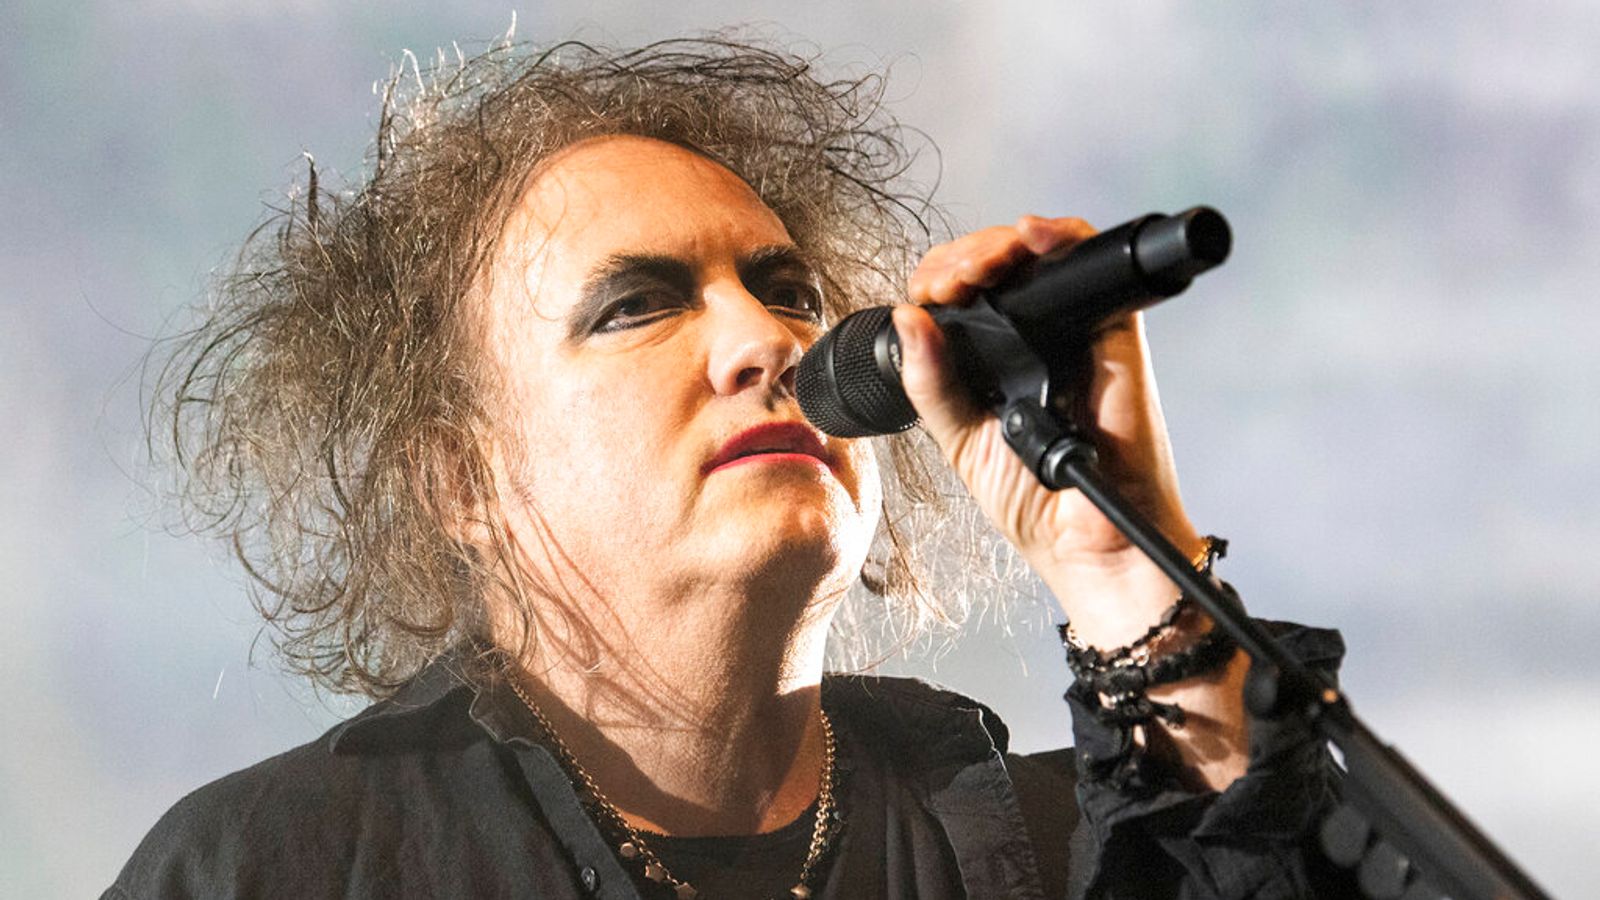 The Cure's Robert Smith persuades Ticketmaster to partially refund